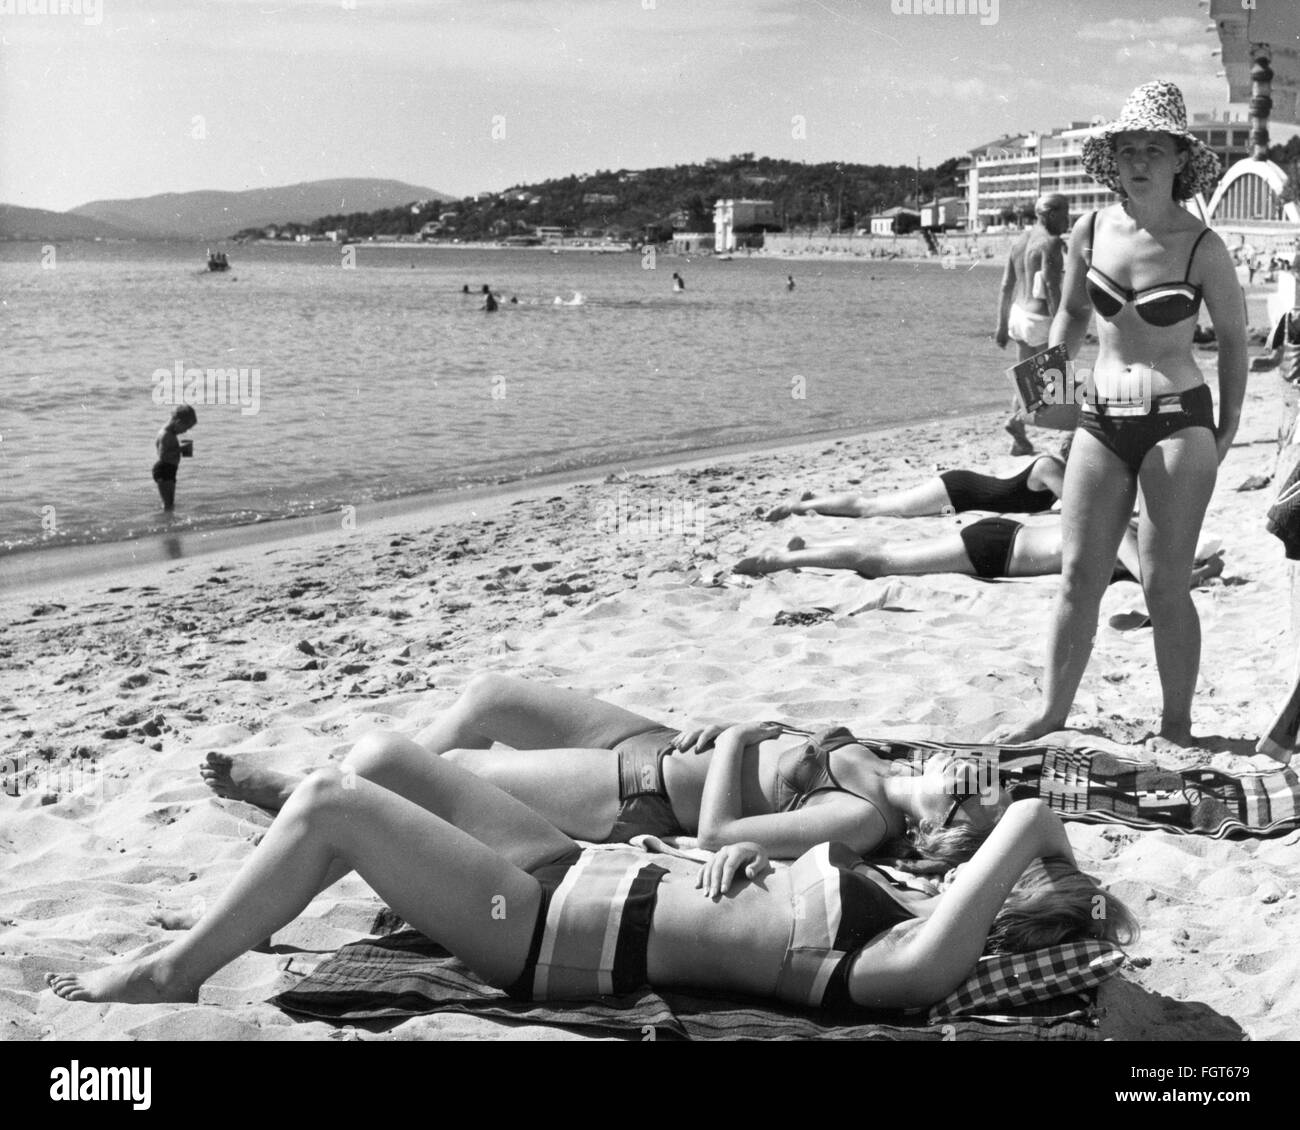 geography / travel, France, Sainte-Maxime, beach, women sunbathing, 1960s, Additional-Rights-Clearences-Not Available Stock Photo